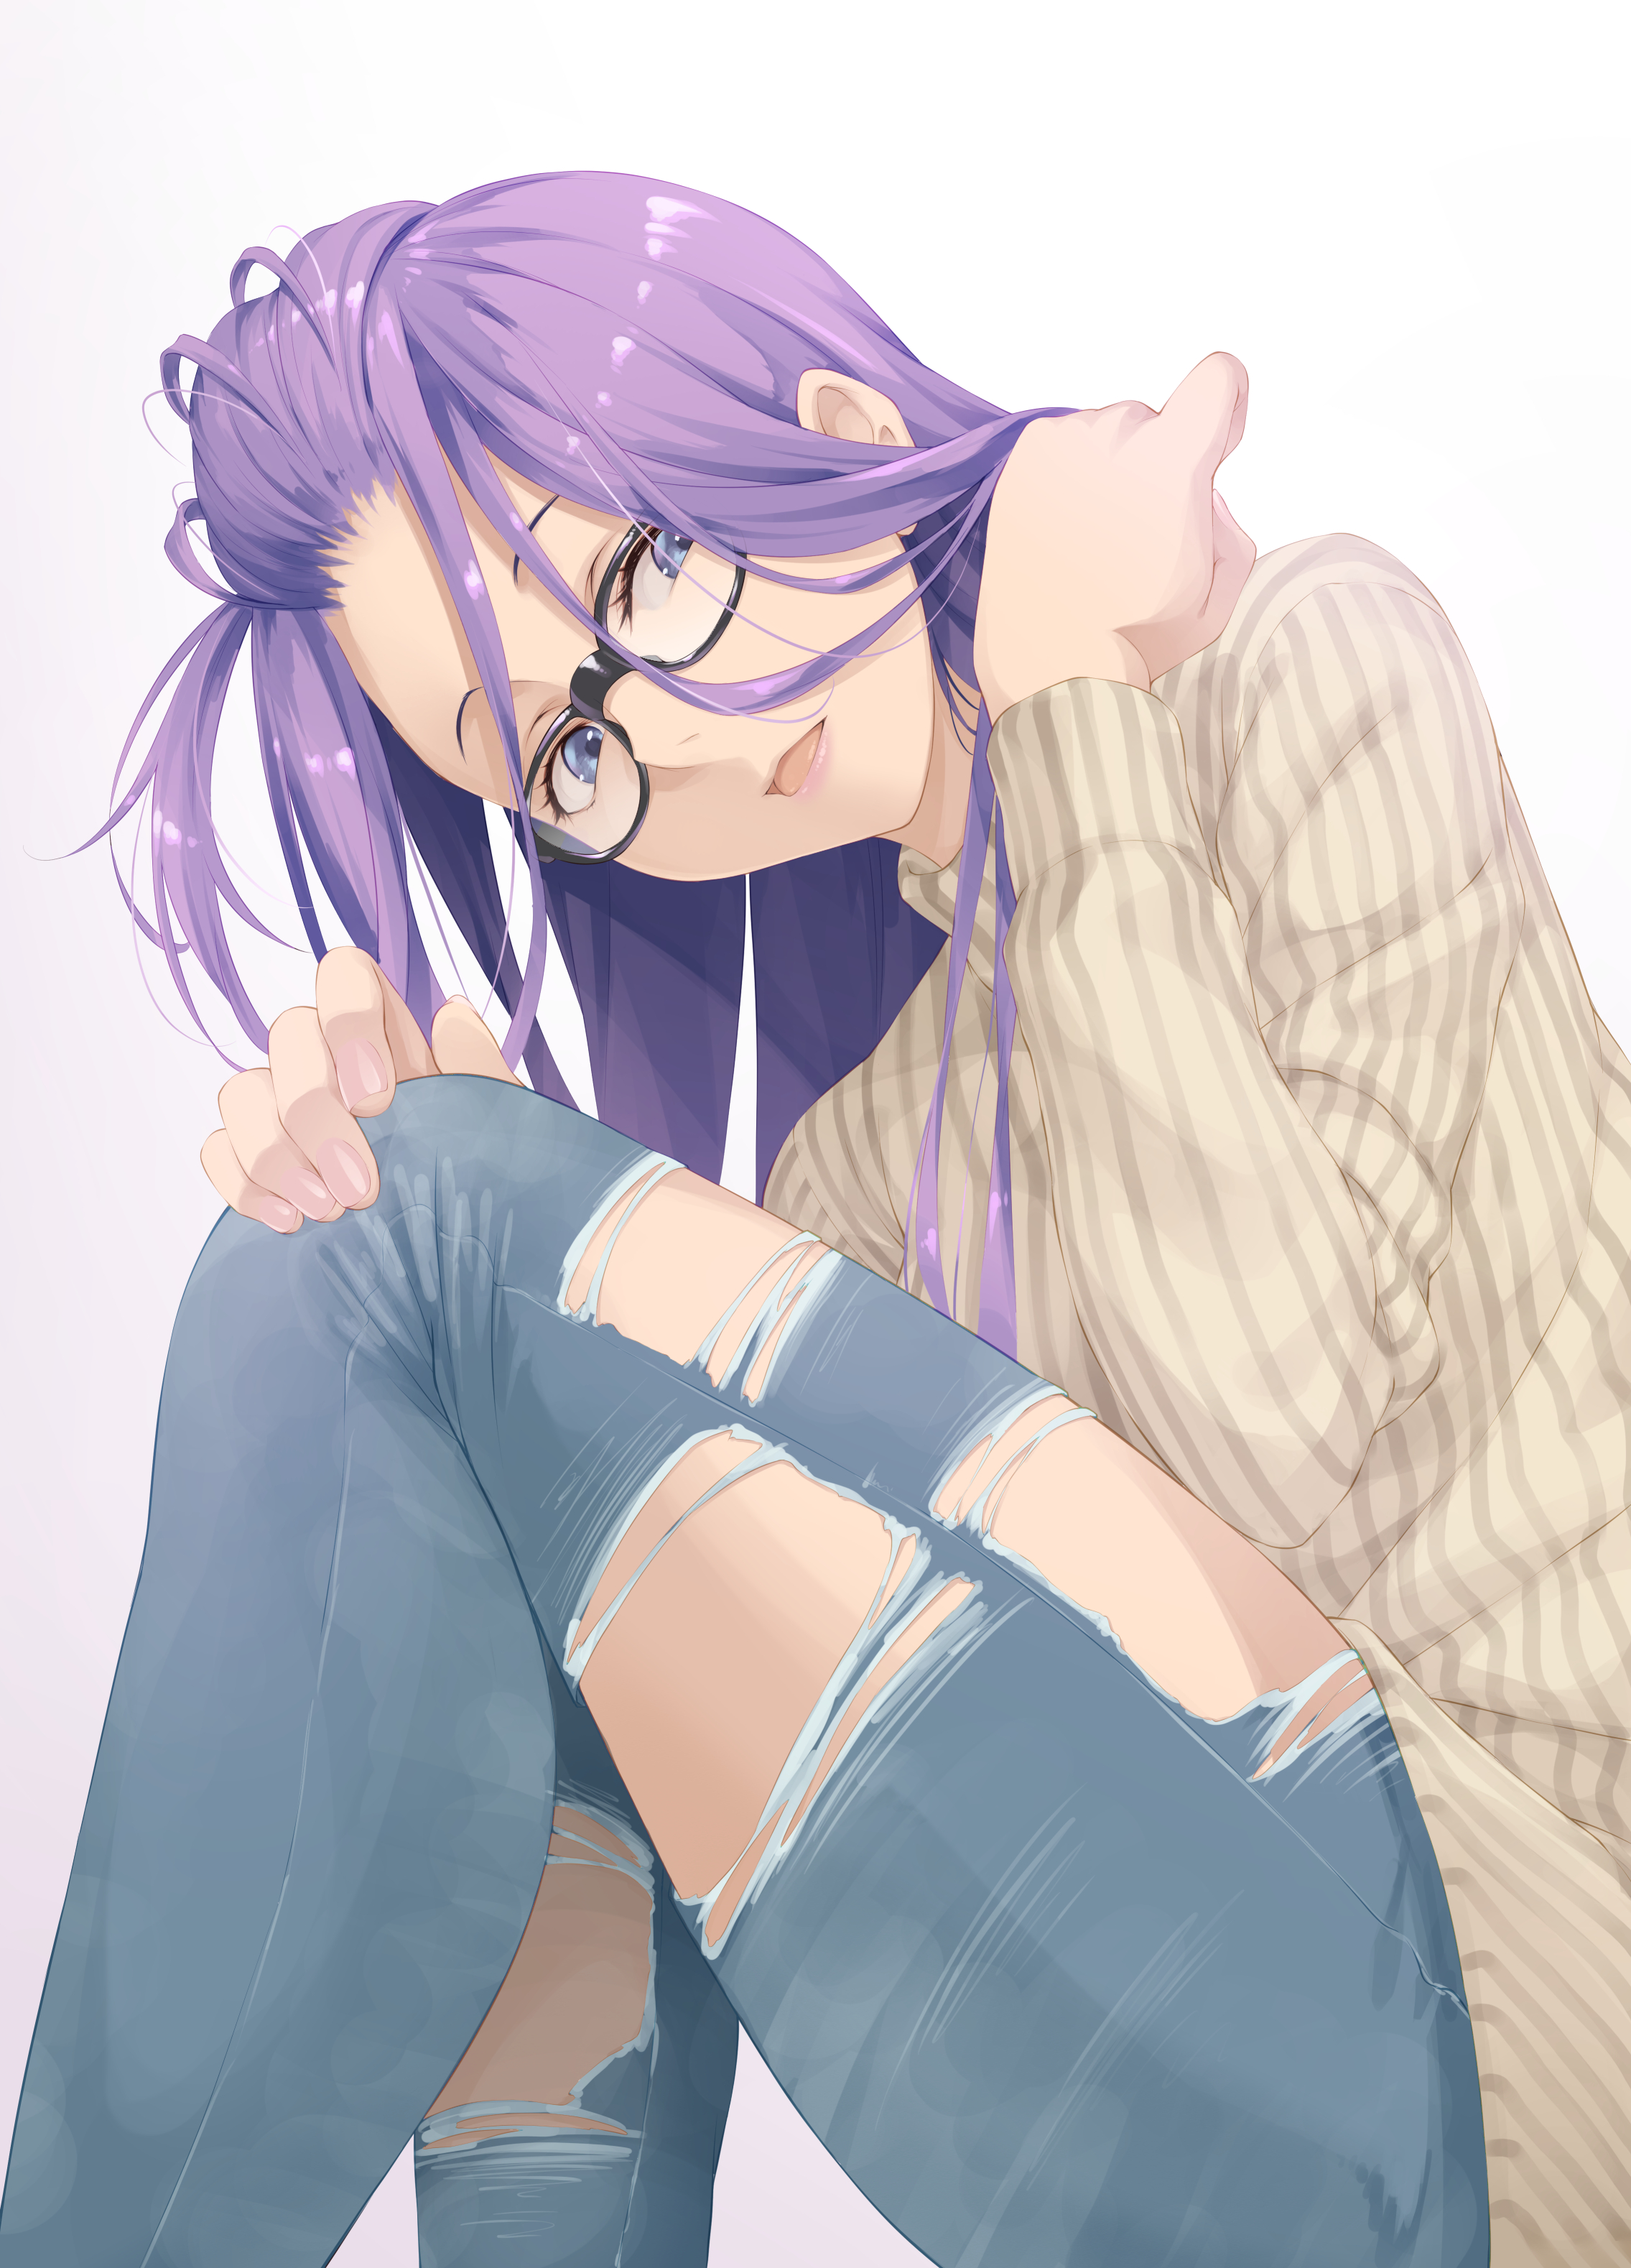 Anime 2271x3157 anime girls simple background Yuru Camp kagamihara sakura 2D torn jeans thighs long hair purple hair touching hair women with glasses big boobs blue eyes looking at viewer open mouth fan art thick thigh